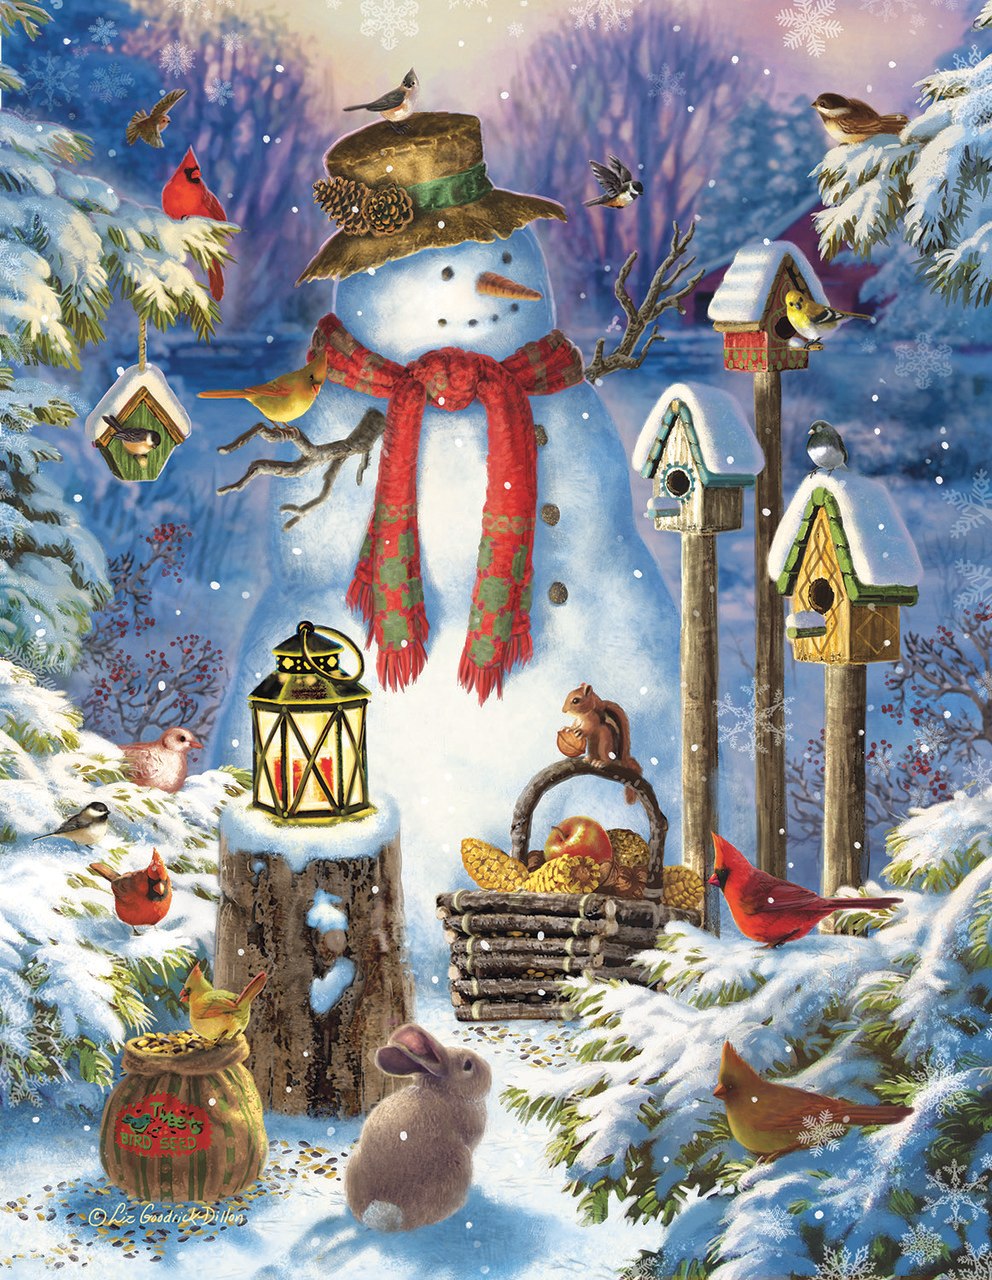 Snowman in the Wild - 1000+pc Jigsaw Puzzle by Sunsout  			  					NEW